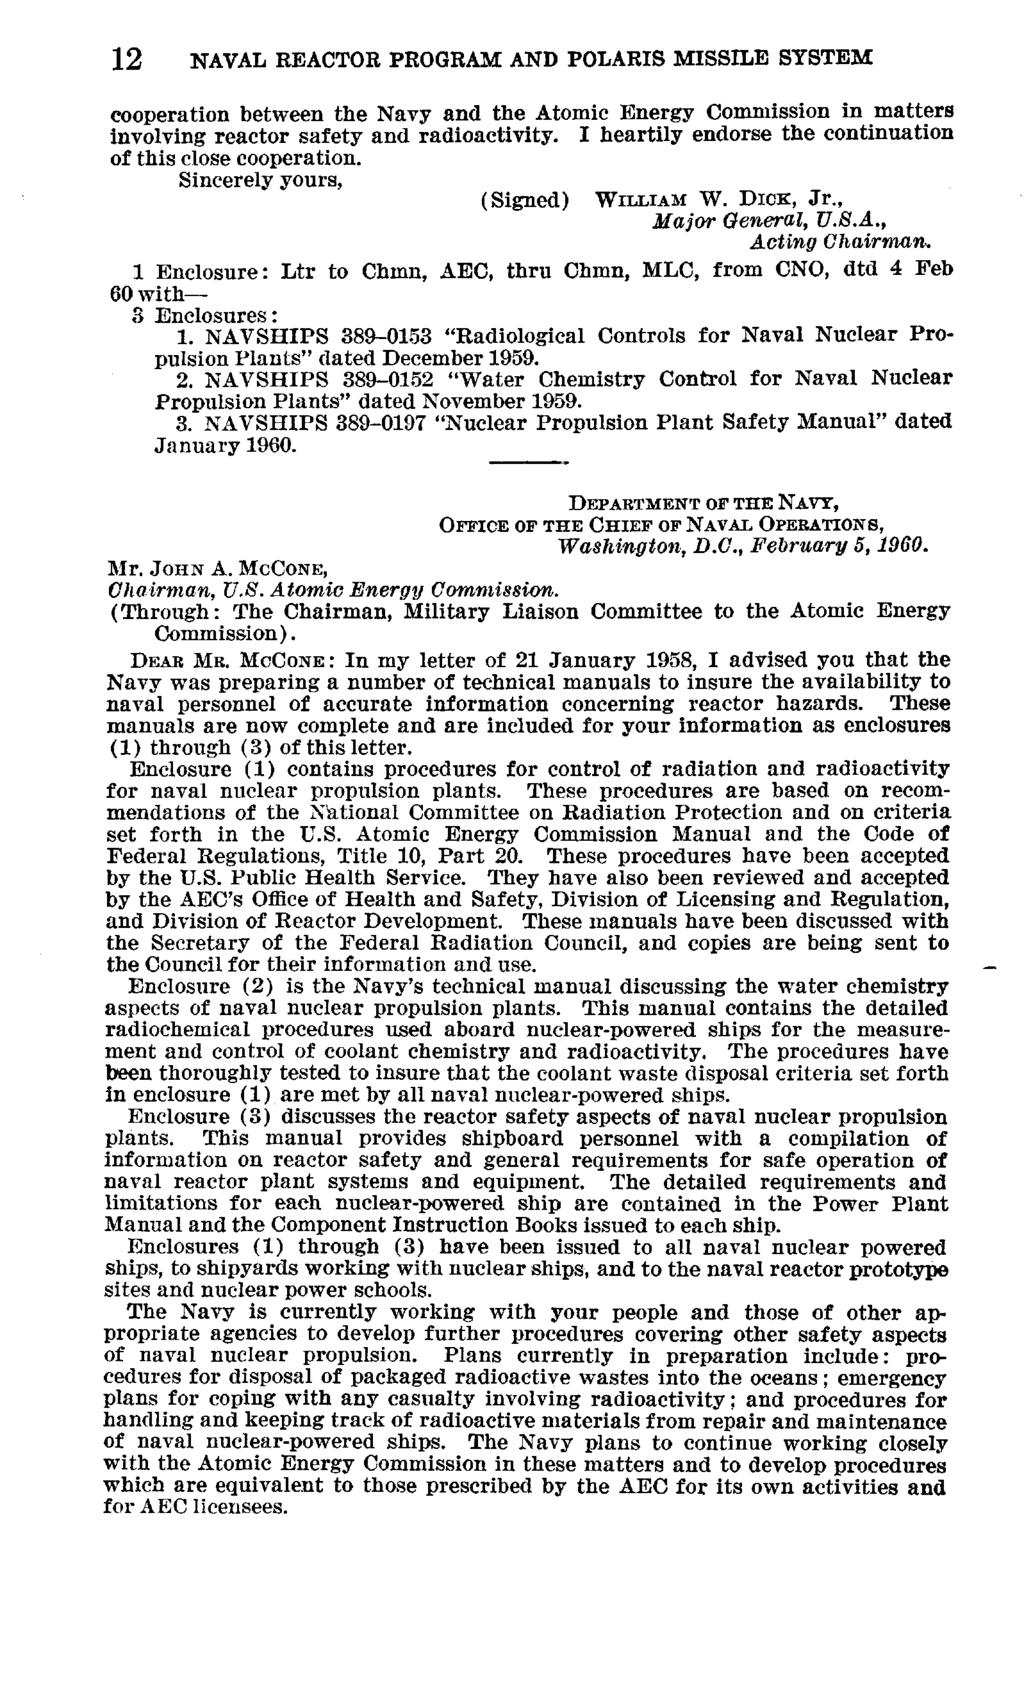 12 NAVAL REACTOR PROGRAM AND POLARIS MISSILE SYSTEM cooperation between the Navy and the Atomic Energy Commission in matters involving reactor safety and radioactivity.